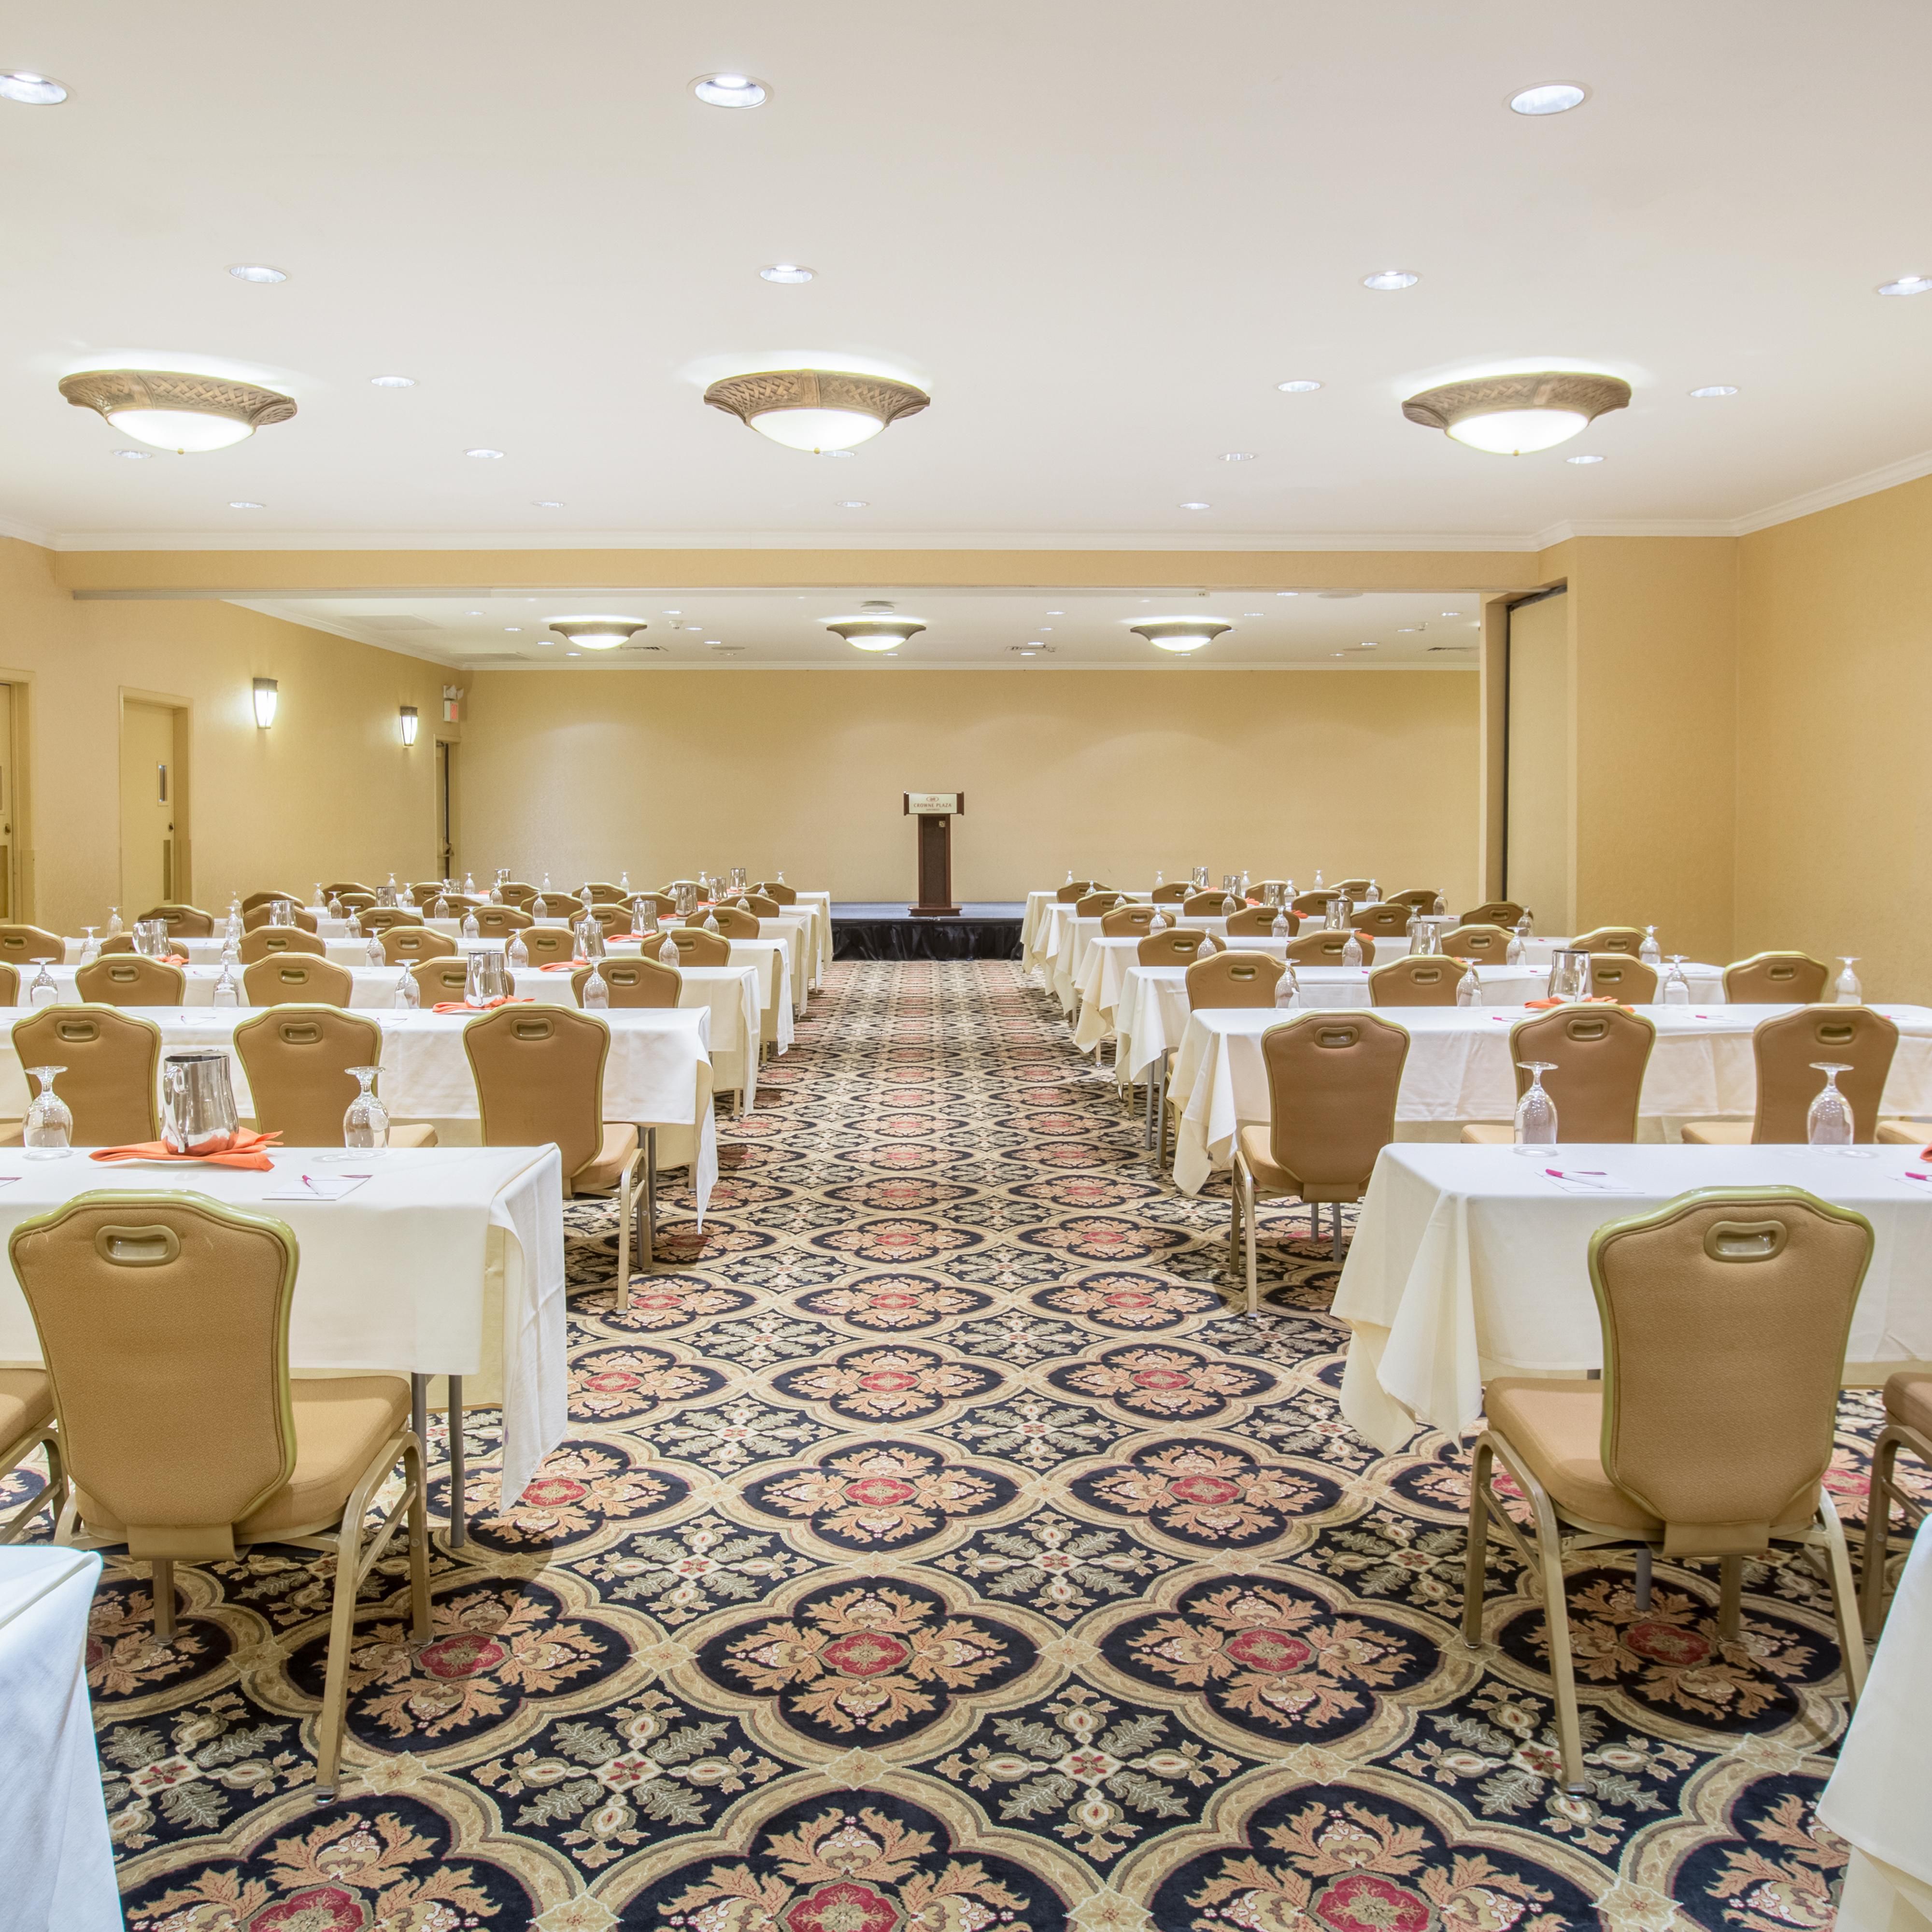 30,000 Sq. Ft. of meeting space makes us perfect for all functions